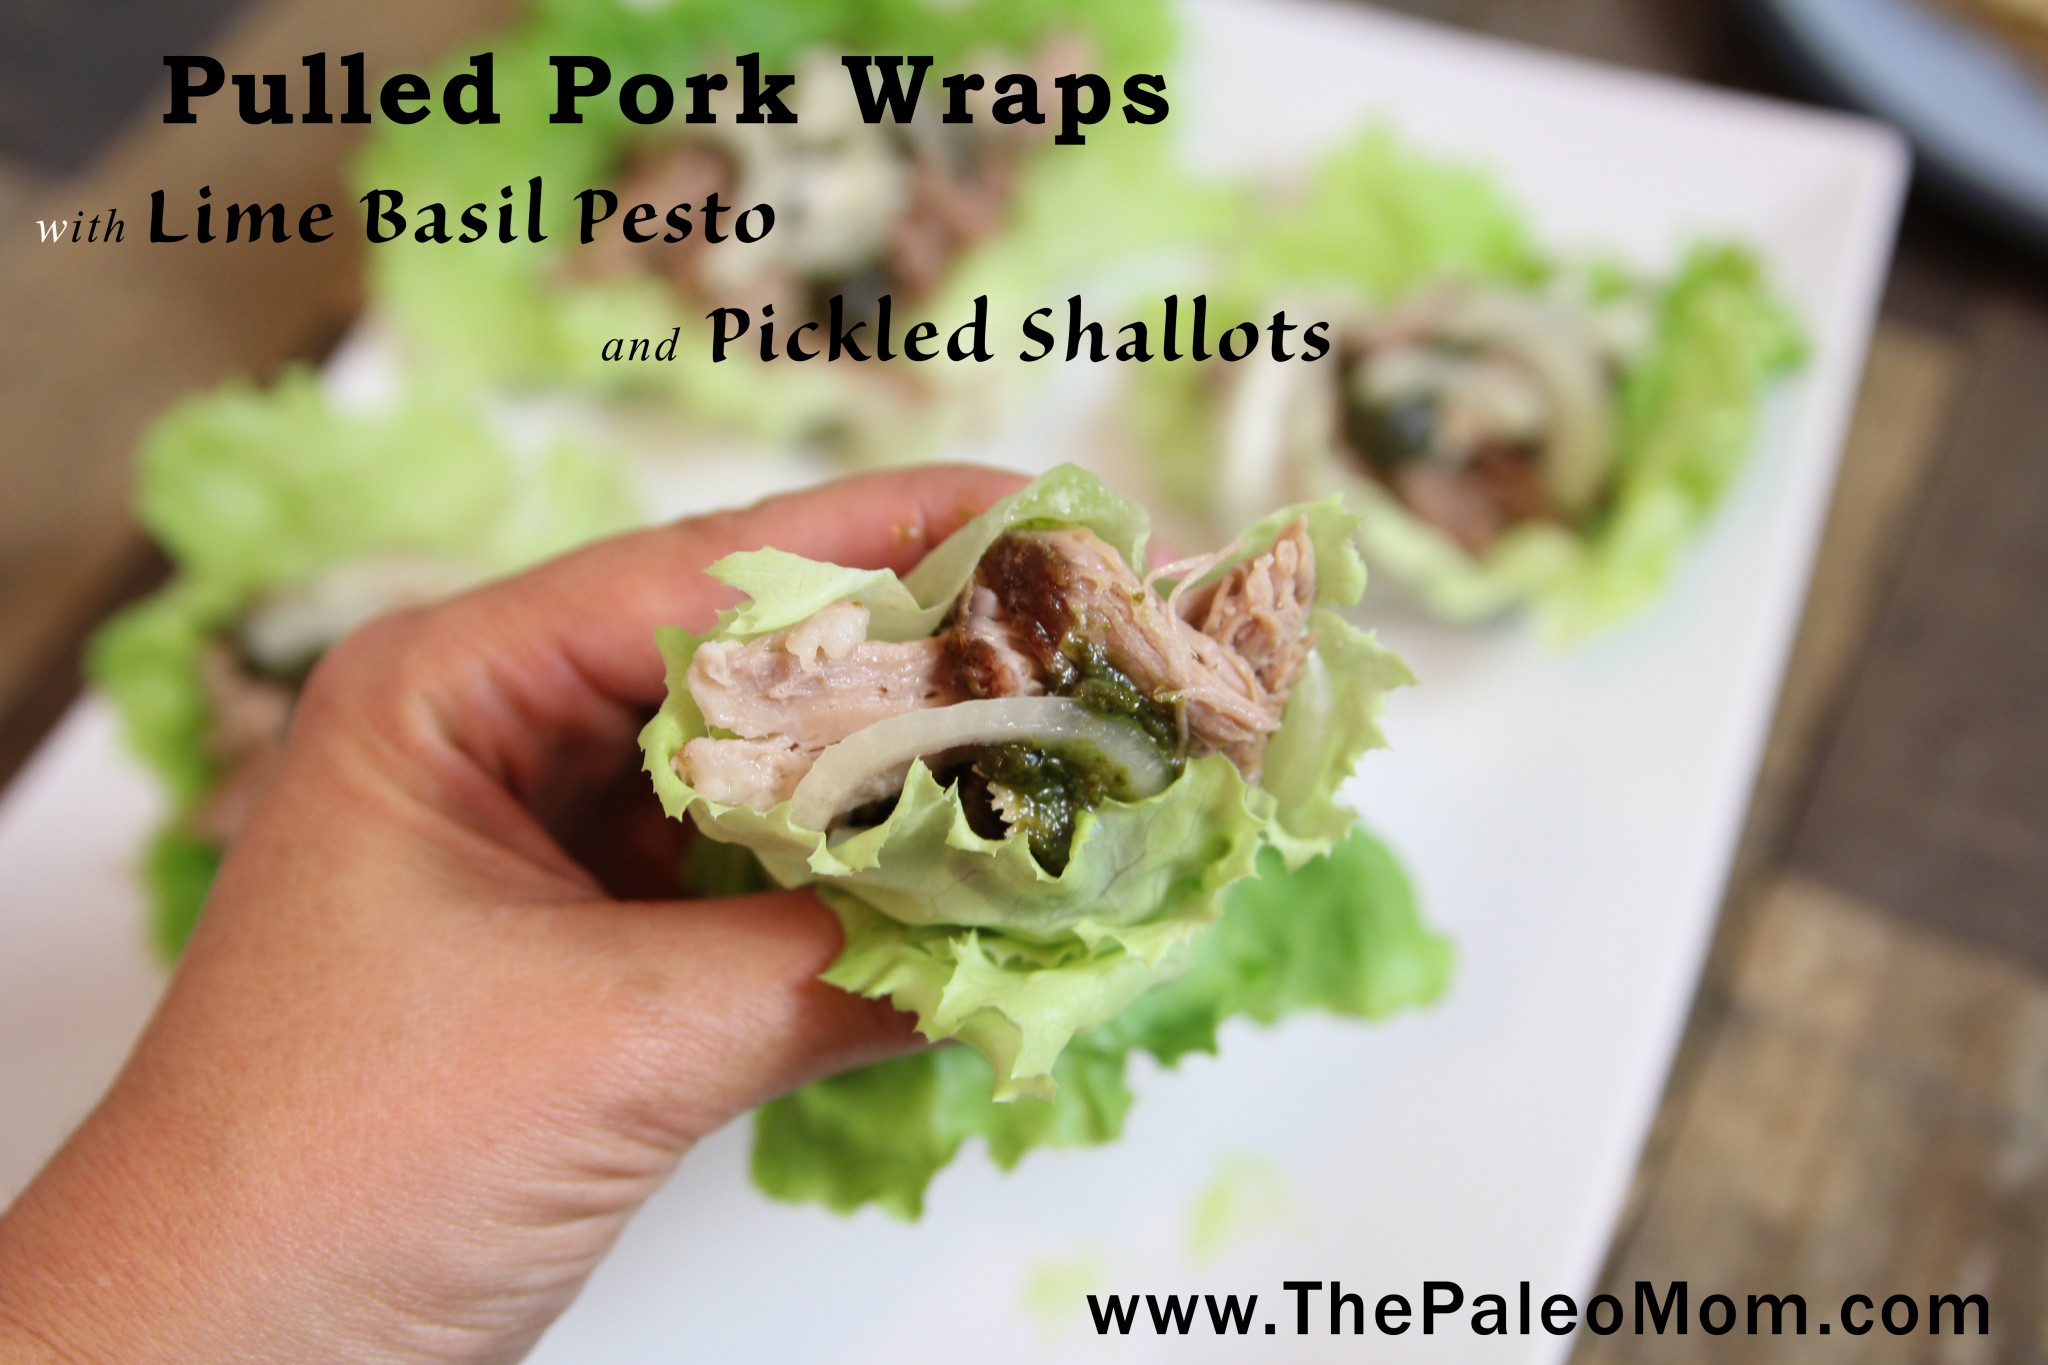 Pulled Pork Wraps with Lime Basil Pesto and Pickled Shallots 2